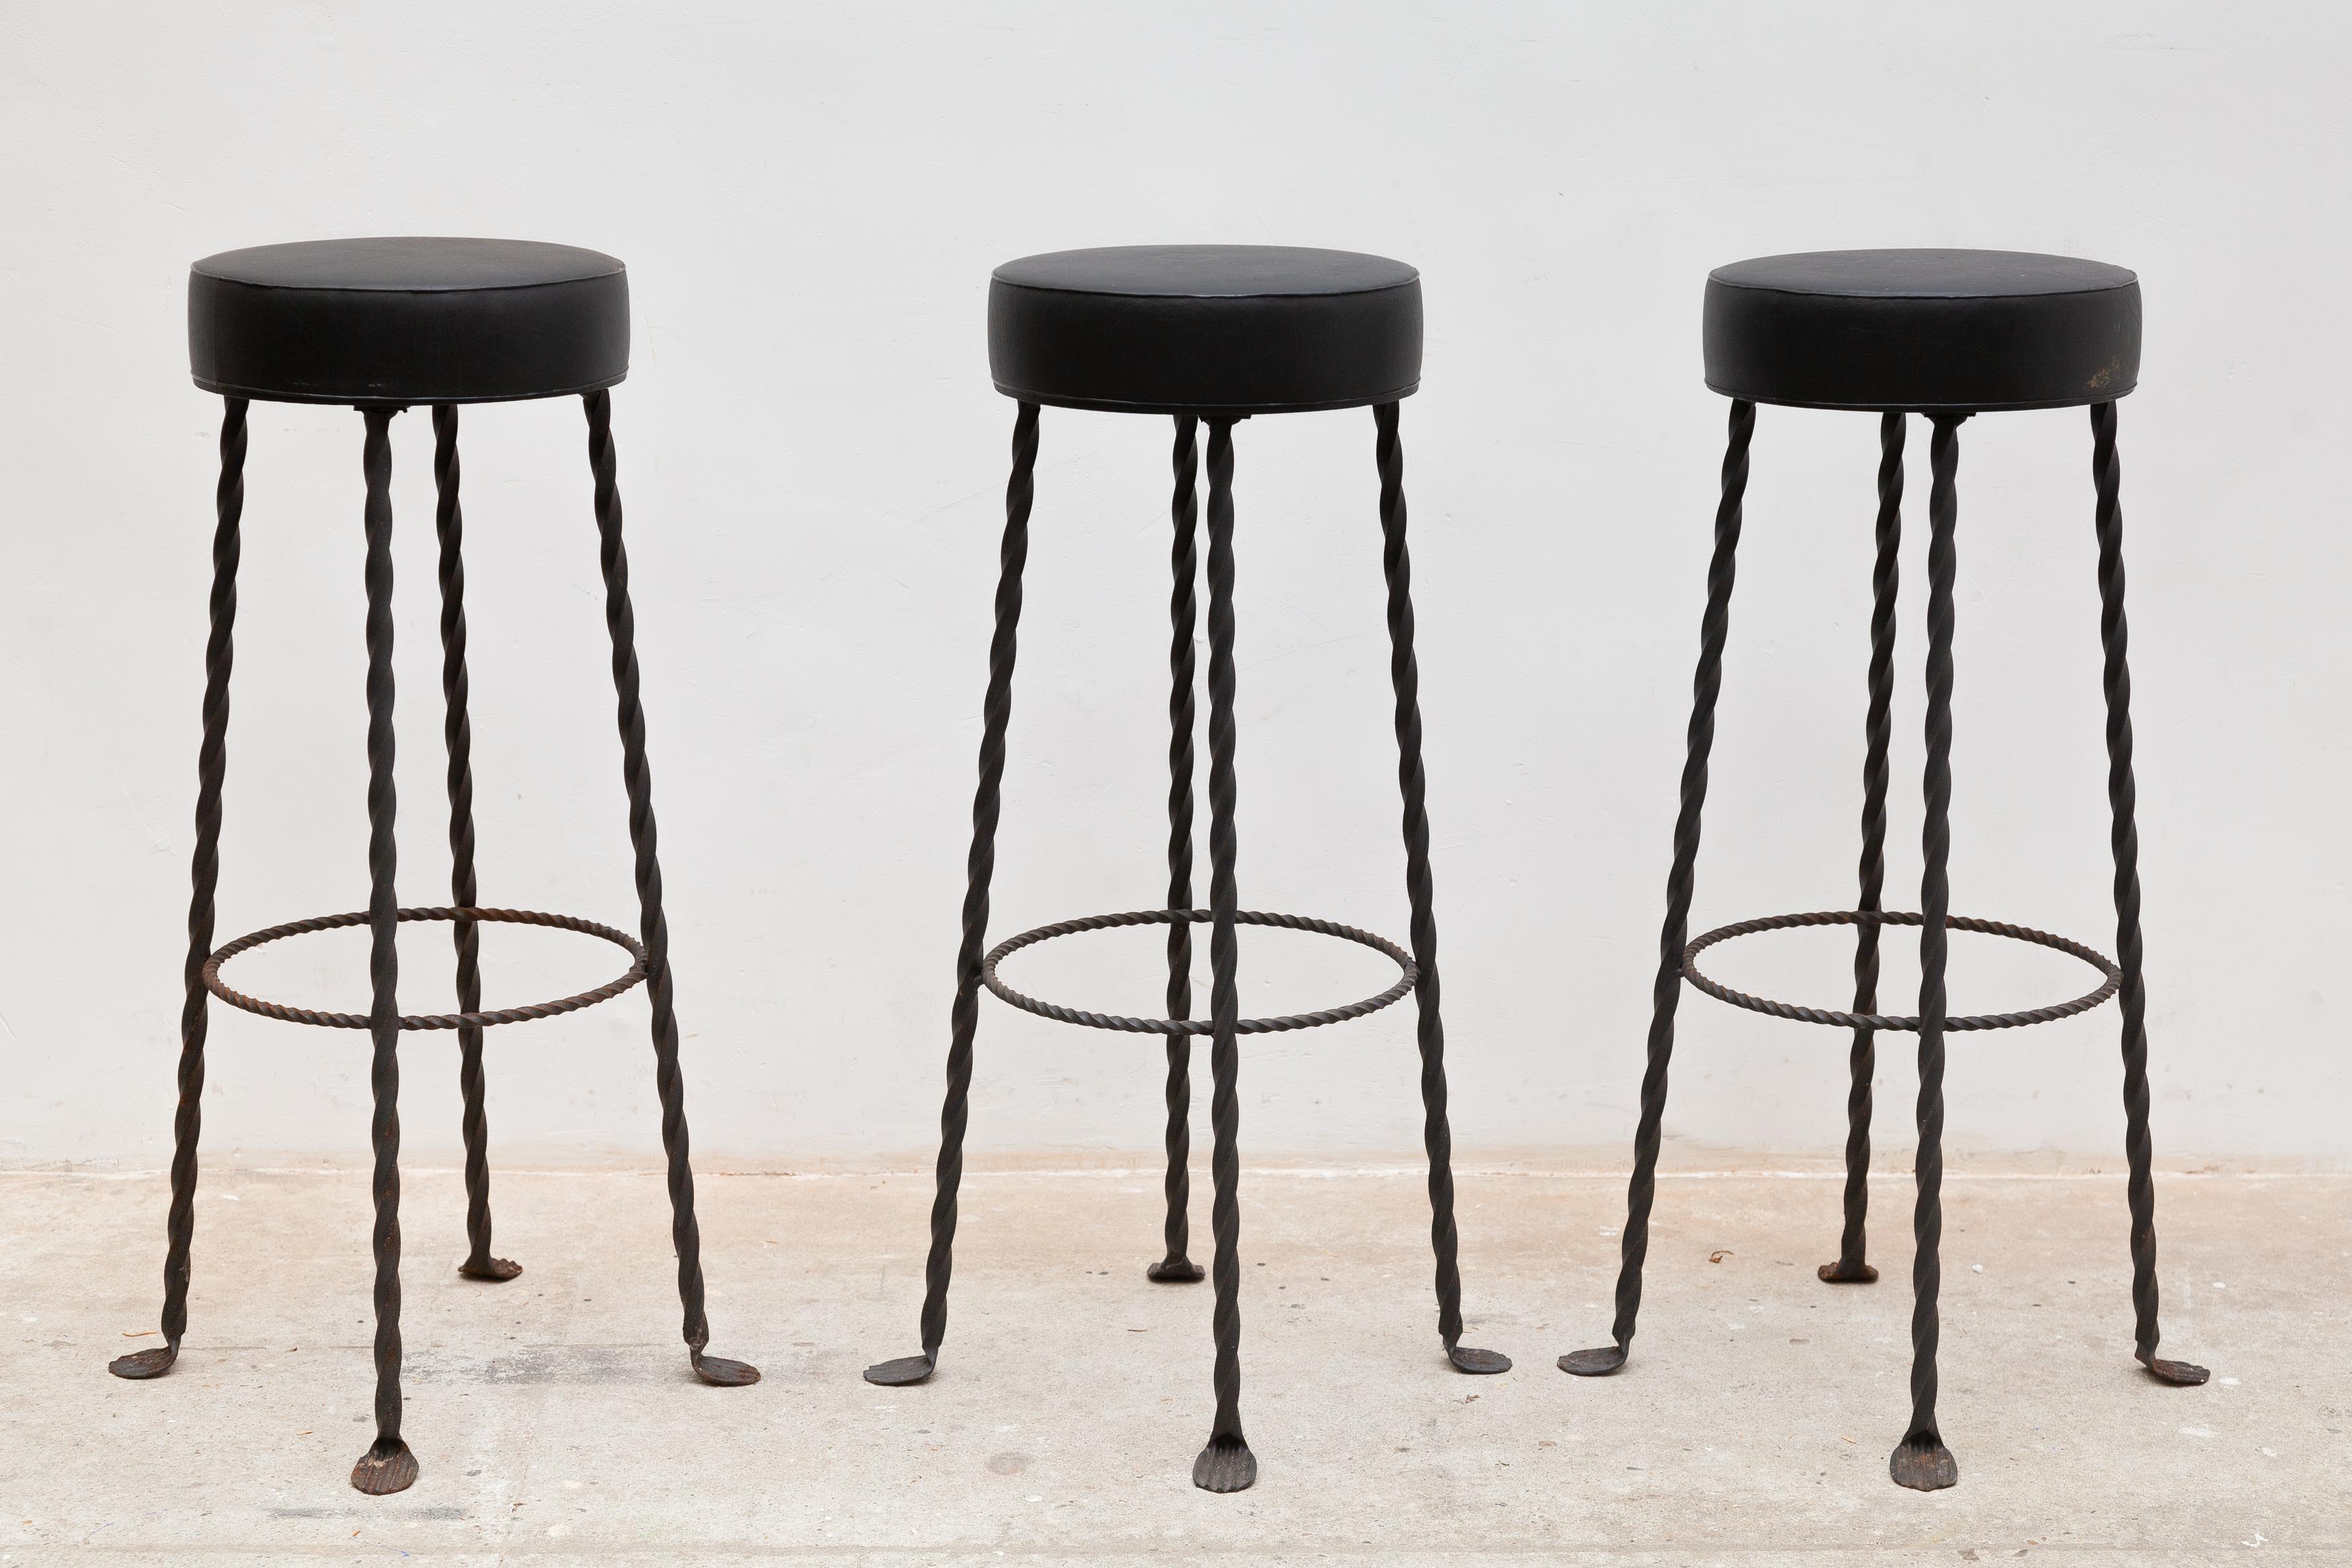 A set of three brutalist styled bar foot stools featured in wrought iron and a black similar seat,France c1960s. The stools are in good original condition and have a nice patina from age and usage. The stools are priced and sold in a set of